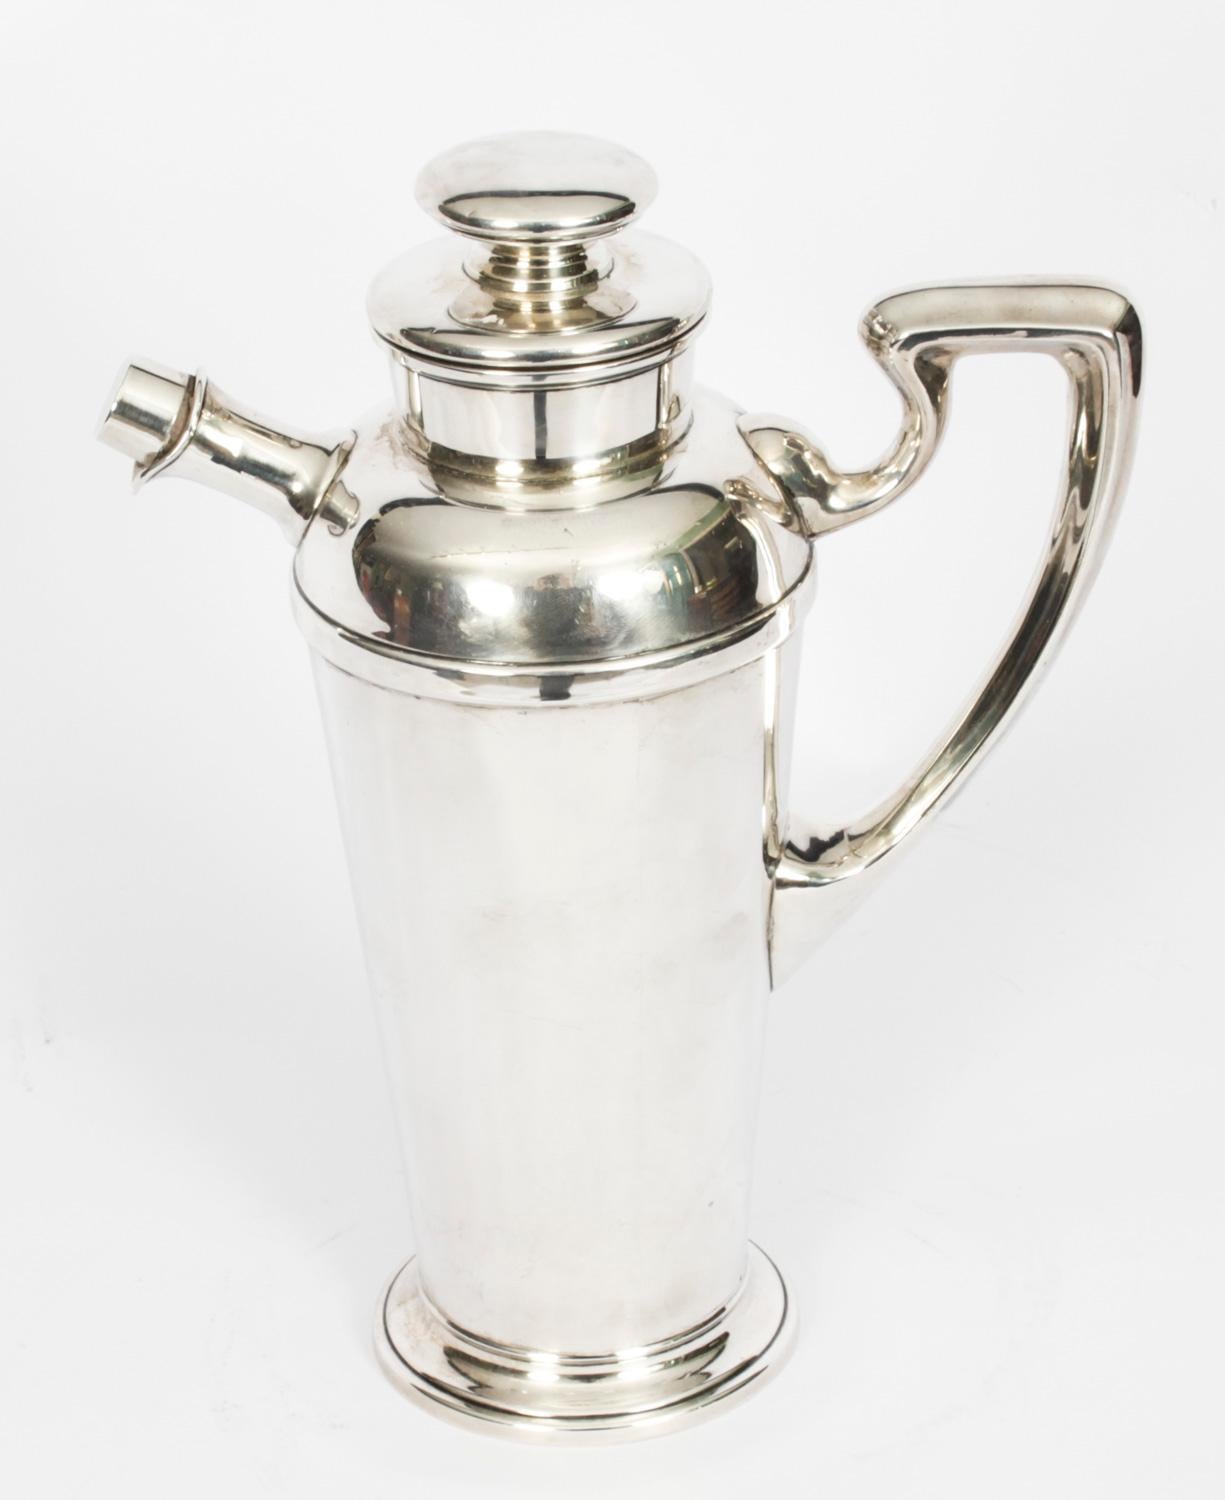 A very attractive sterling silver Art Deco cocktail shaker dating from Circa 1930.
 
It bears the makers mark for Ariston Silversmith Corp of New York, a company that was active in the 1930's, and the sterling silver 925 mark.
 
There is no